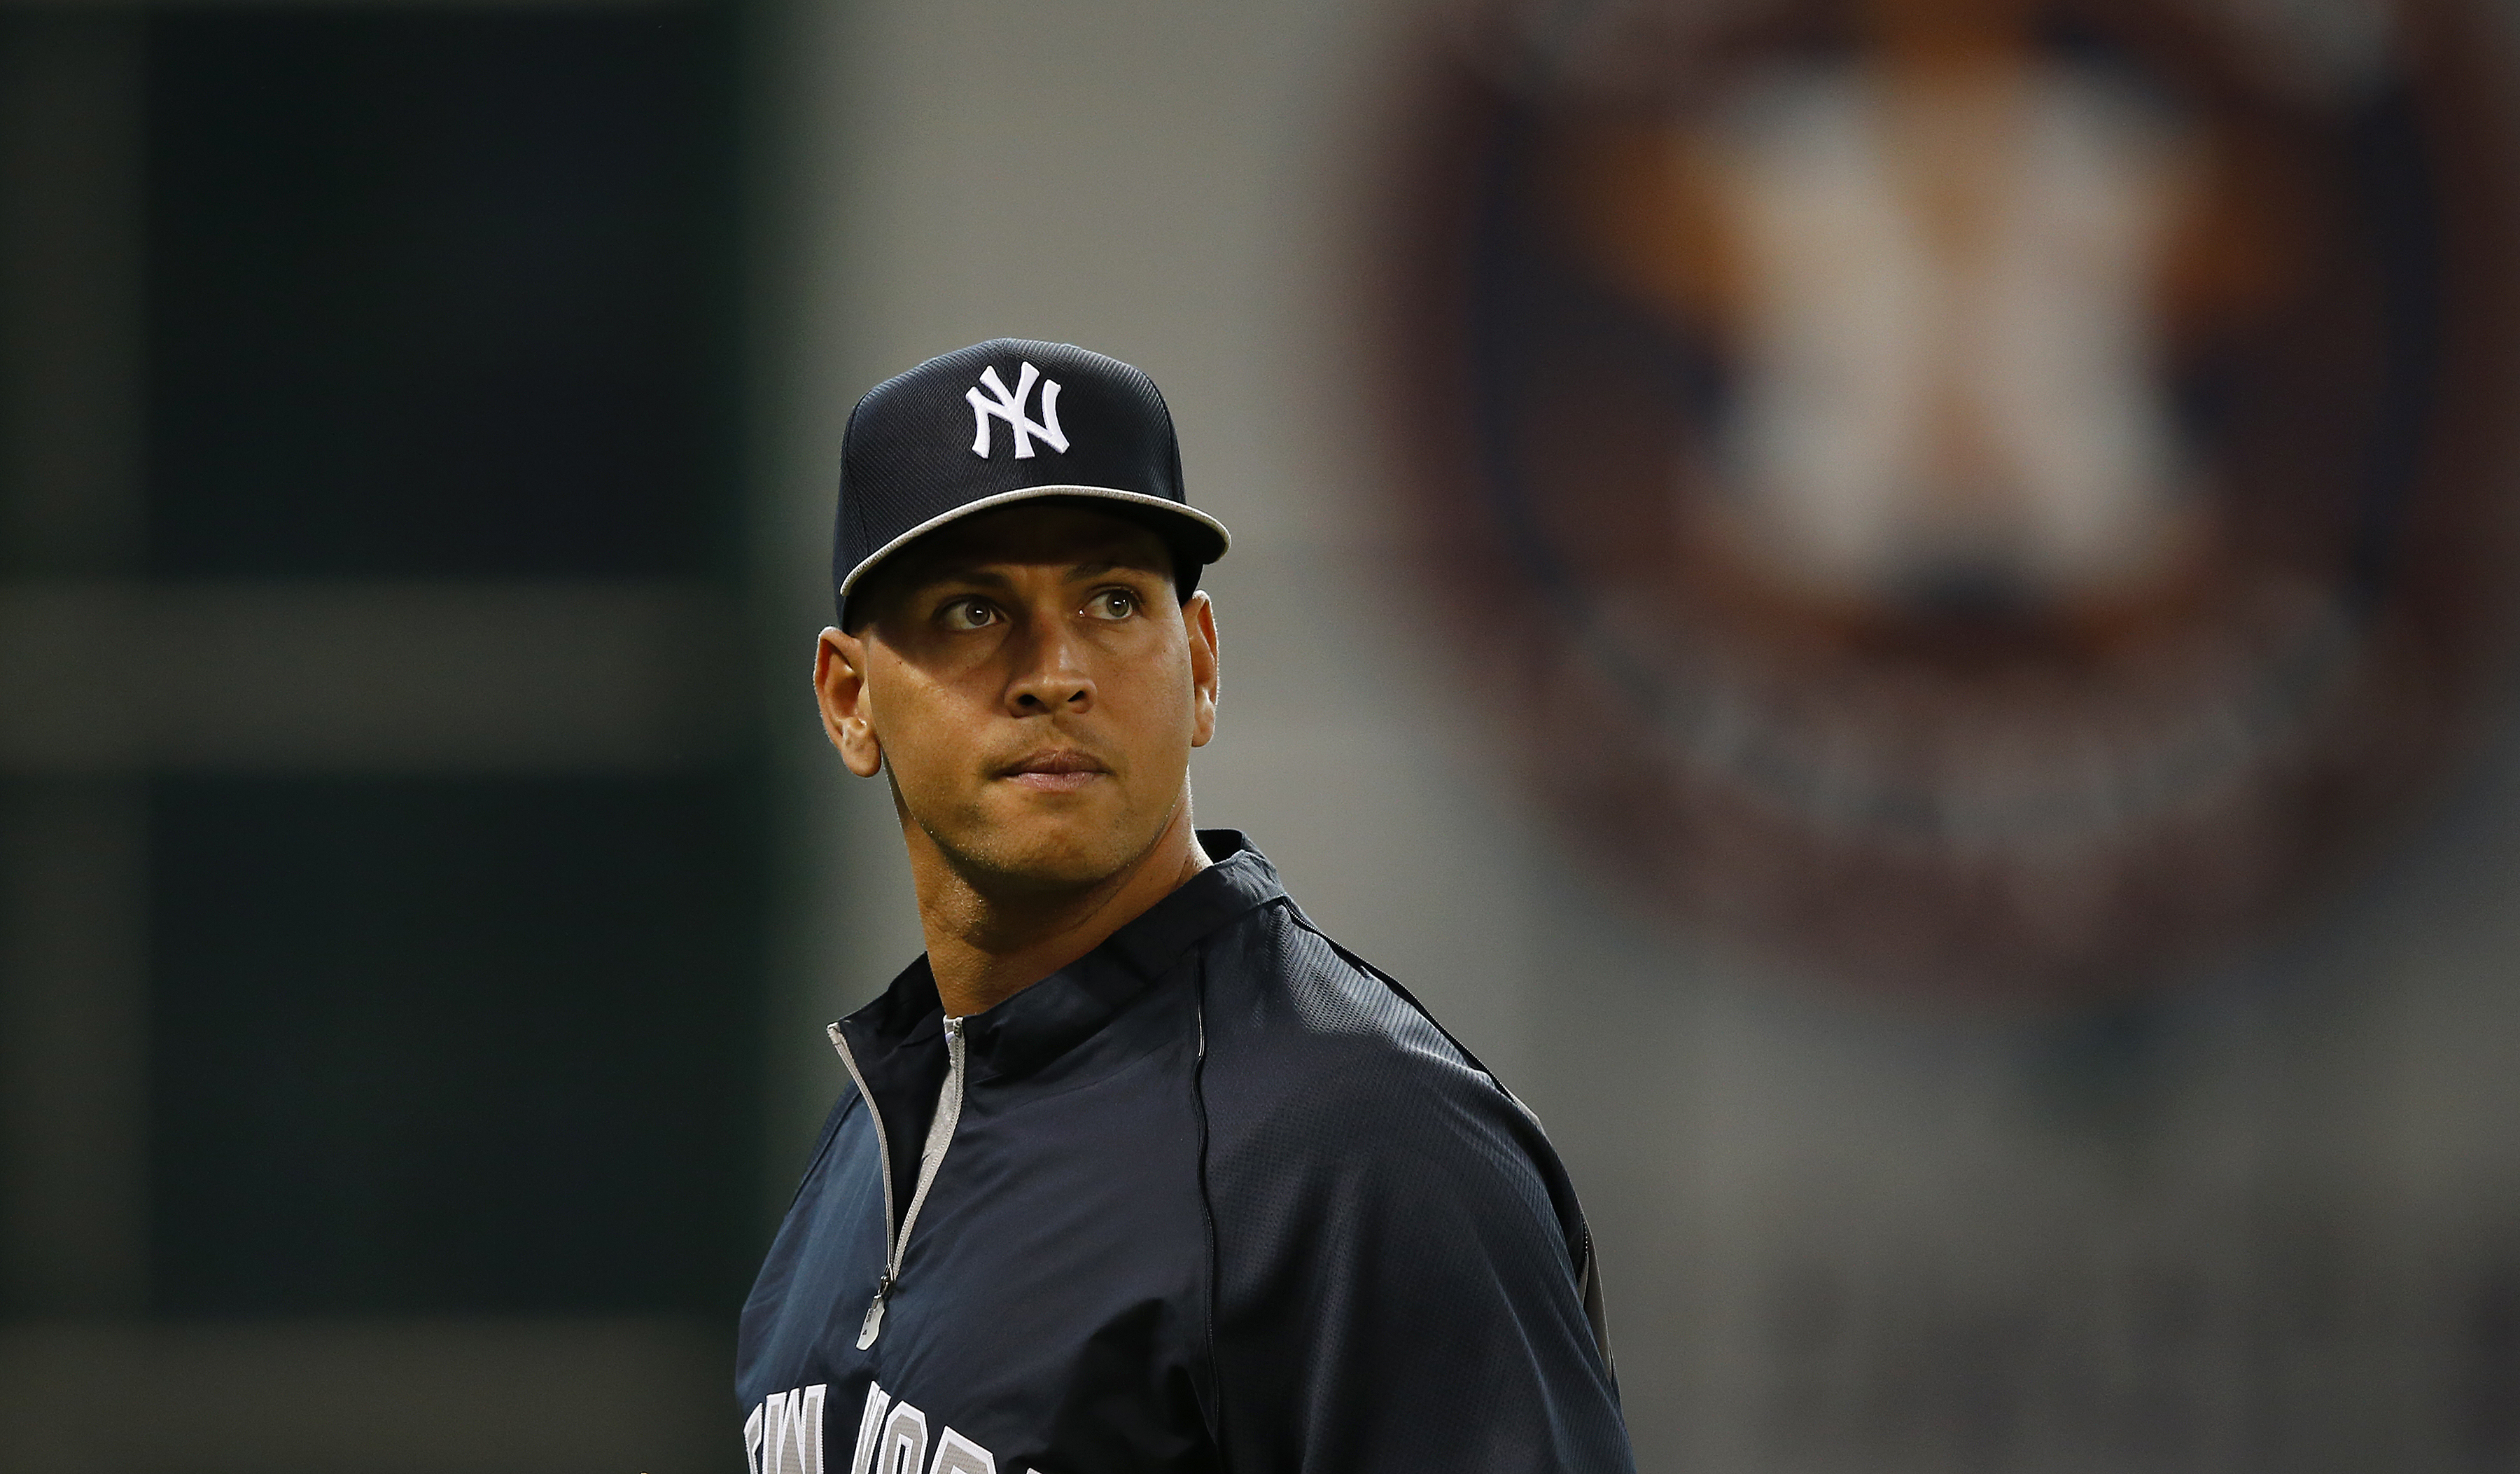 New York Yankees third baseman Alex Rodriguez (13) looks on prior to an MLB baseball game against the Houston Astros at Minute Maid Park on Sept. 27, 2013 in Houston. (Aaron M. Sprecher—AP)